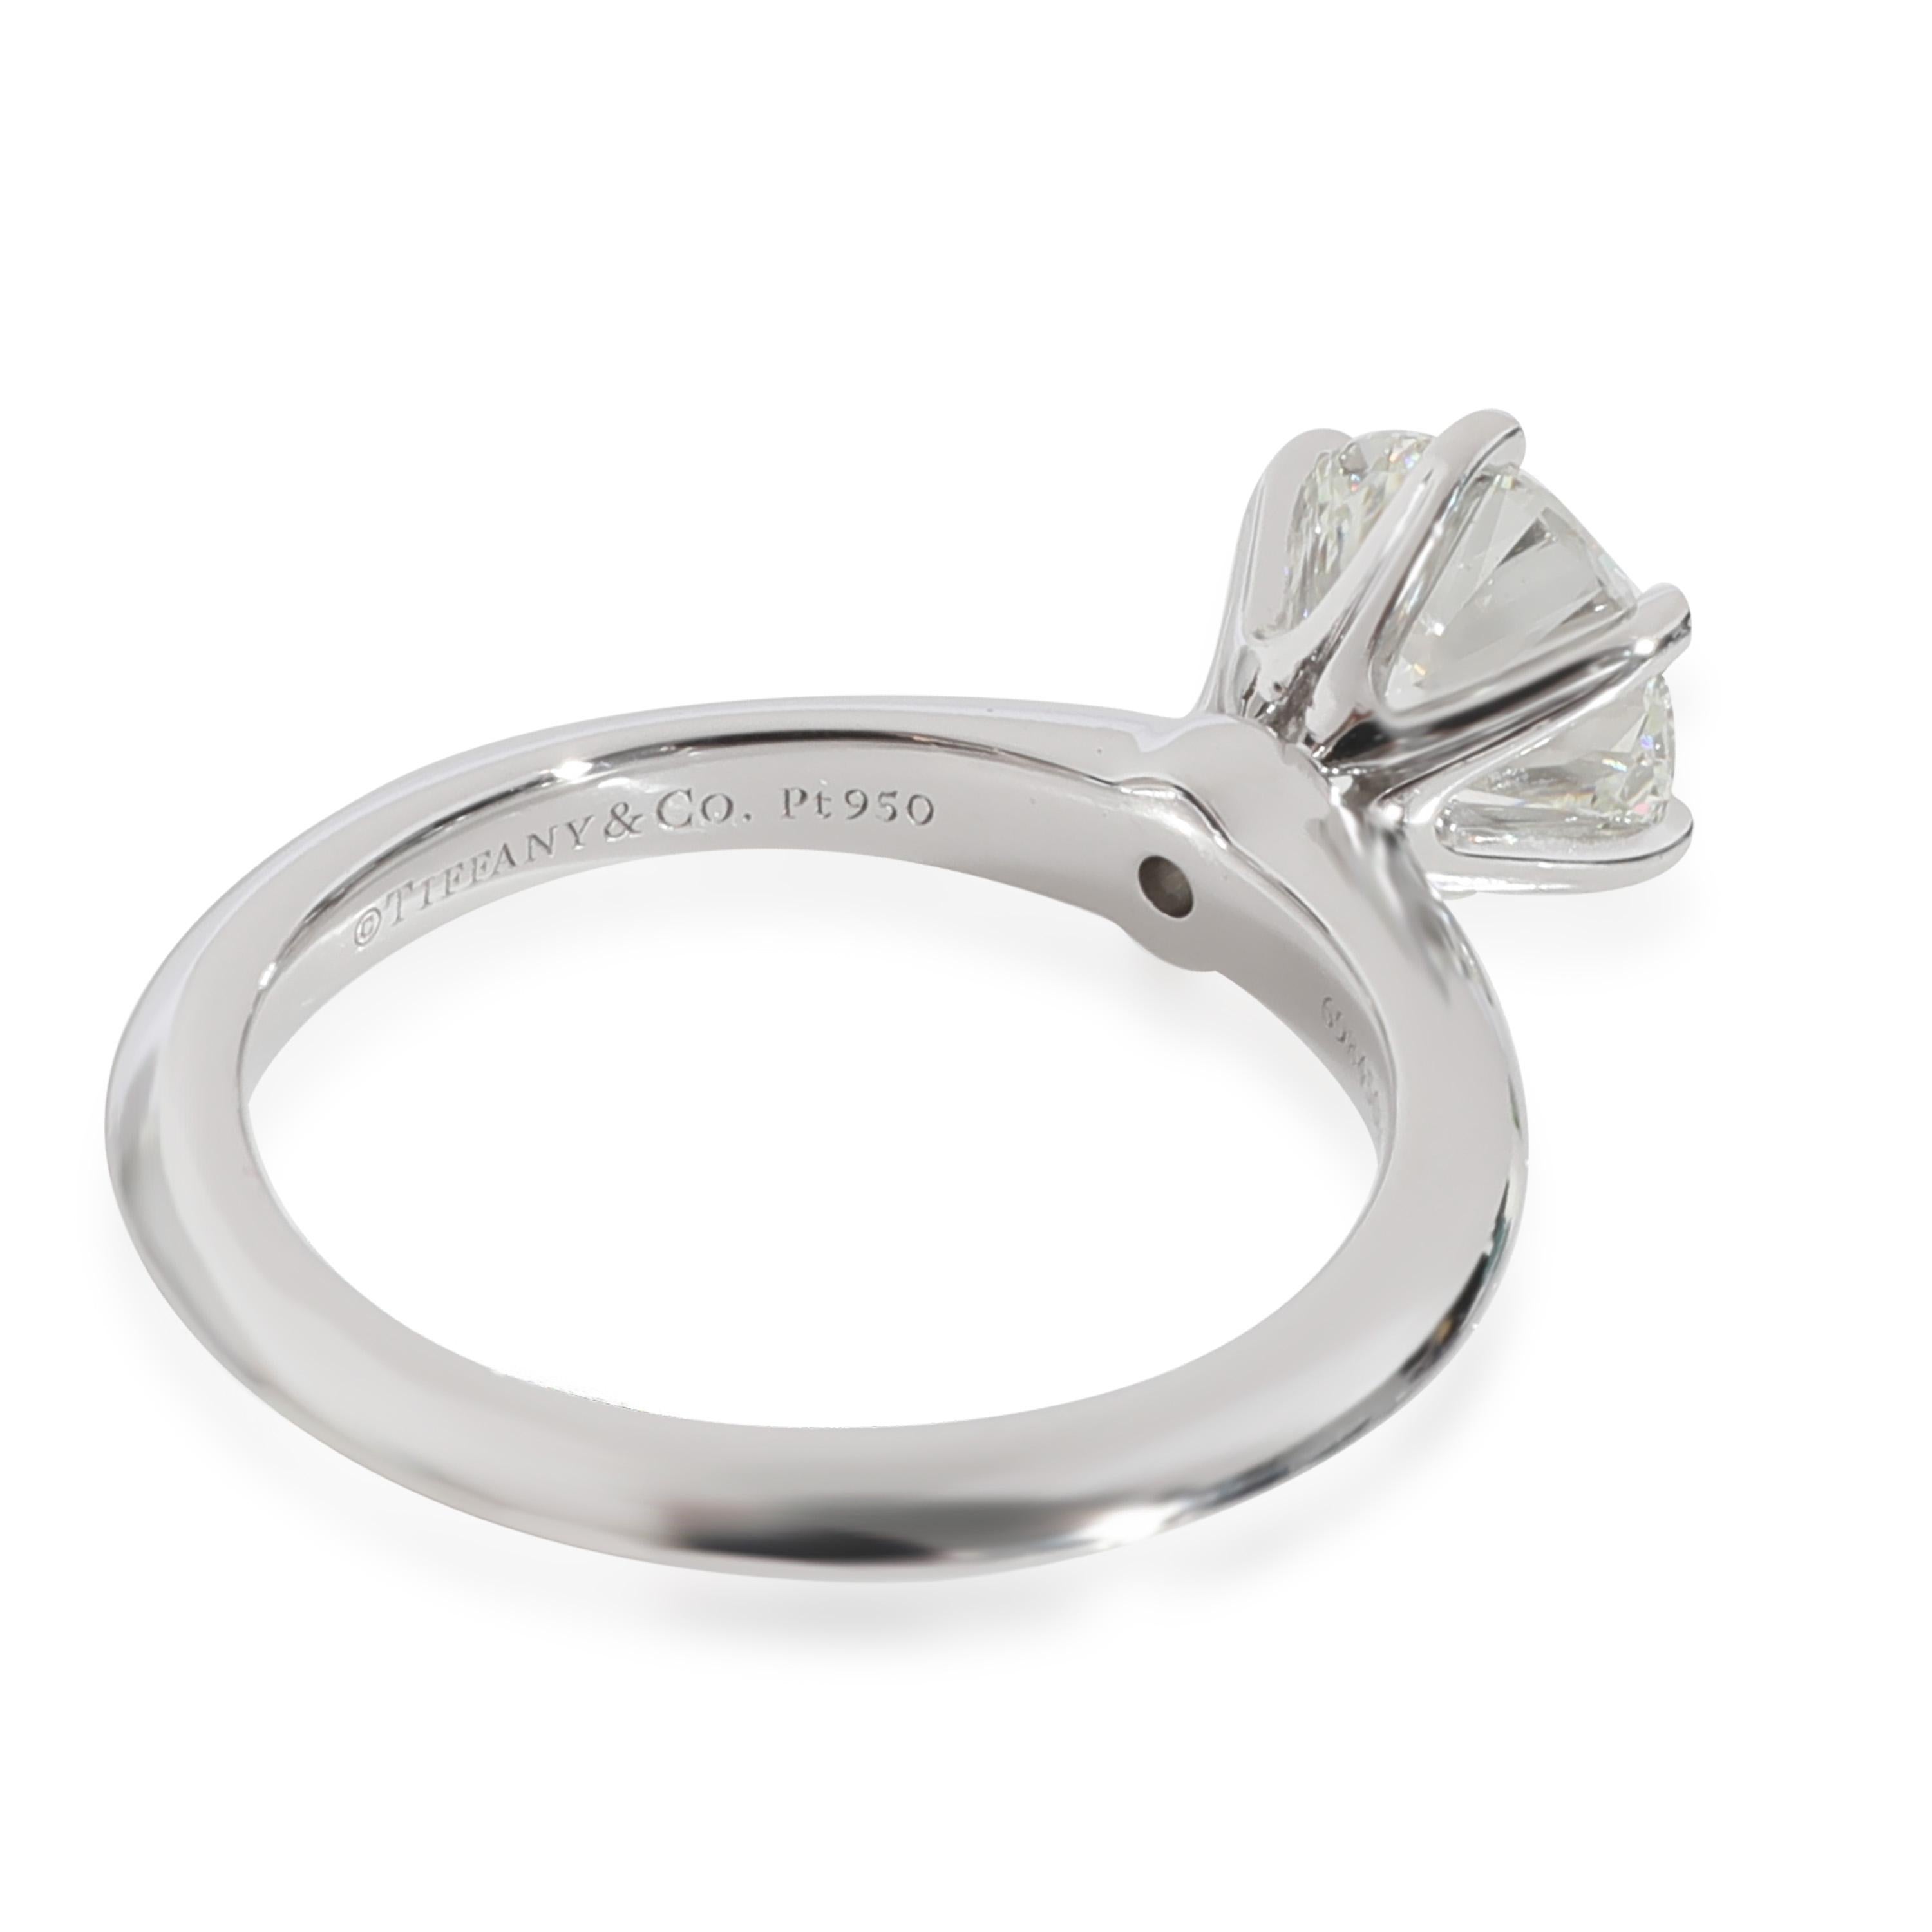 Tiffany & Co. Diamond Engagement Solitaire Ring in  Platinum H VS2 1.39 CT

PRIMARY DETAILS
SKU: 128720
Listing Title: Tiffany & Co. Diamond Engagement Solitaire Ring in  Platinum H VS2 1.39 CT
Condition Description: Retails for 22600 USD. In